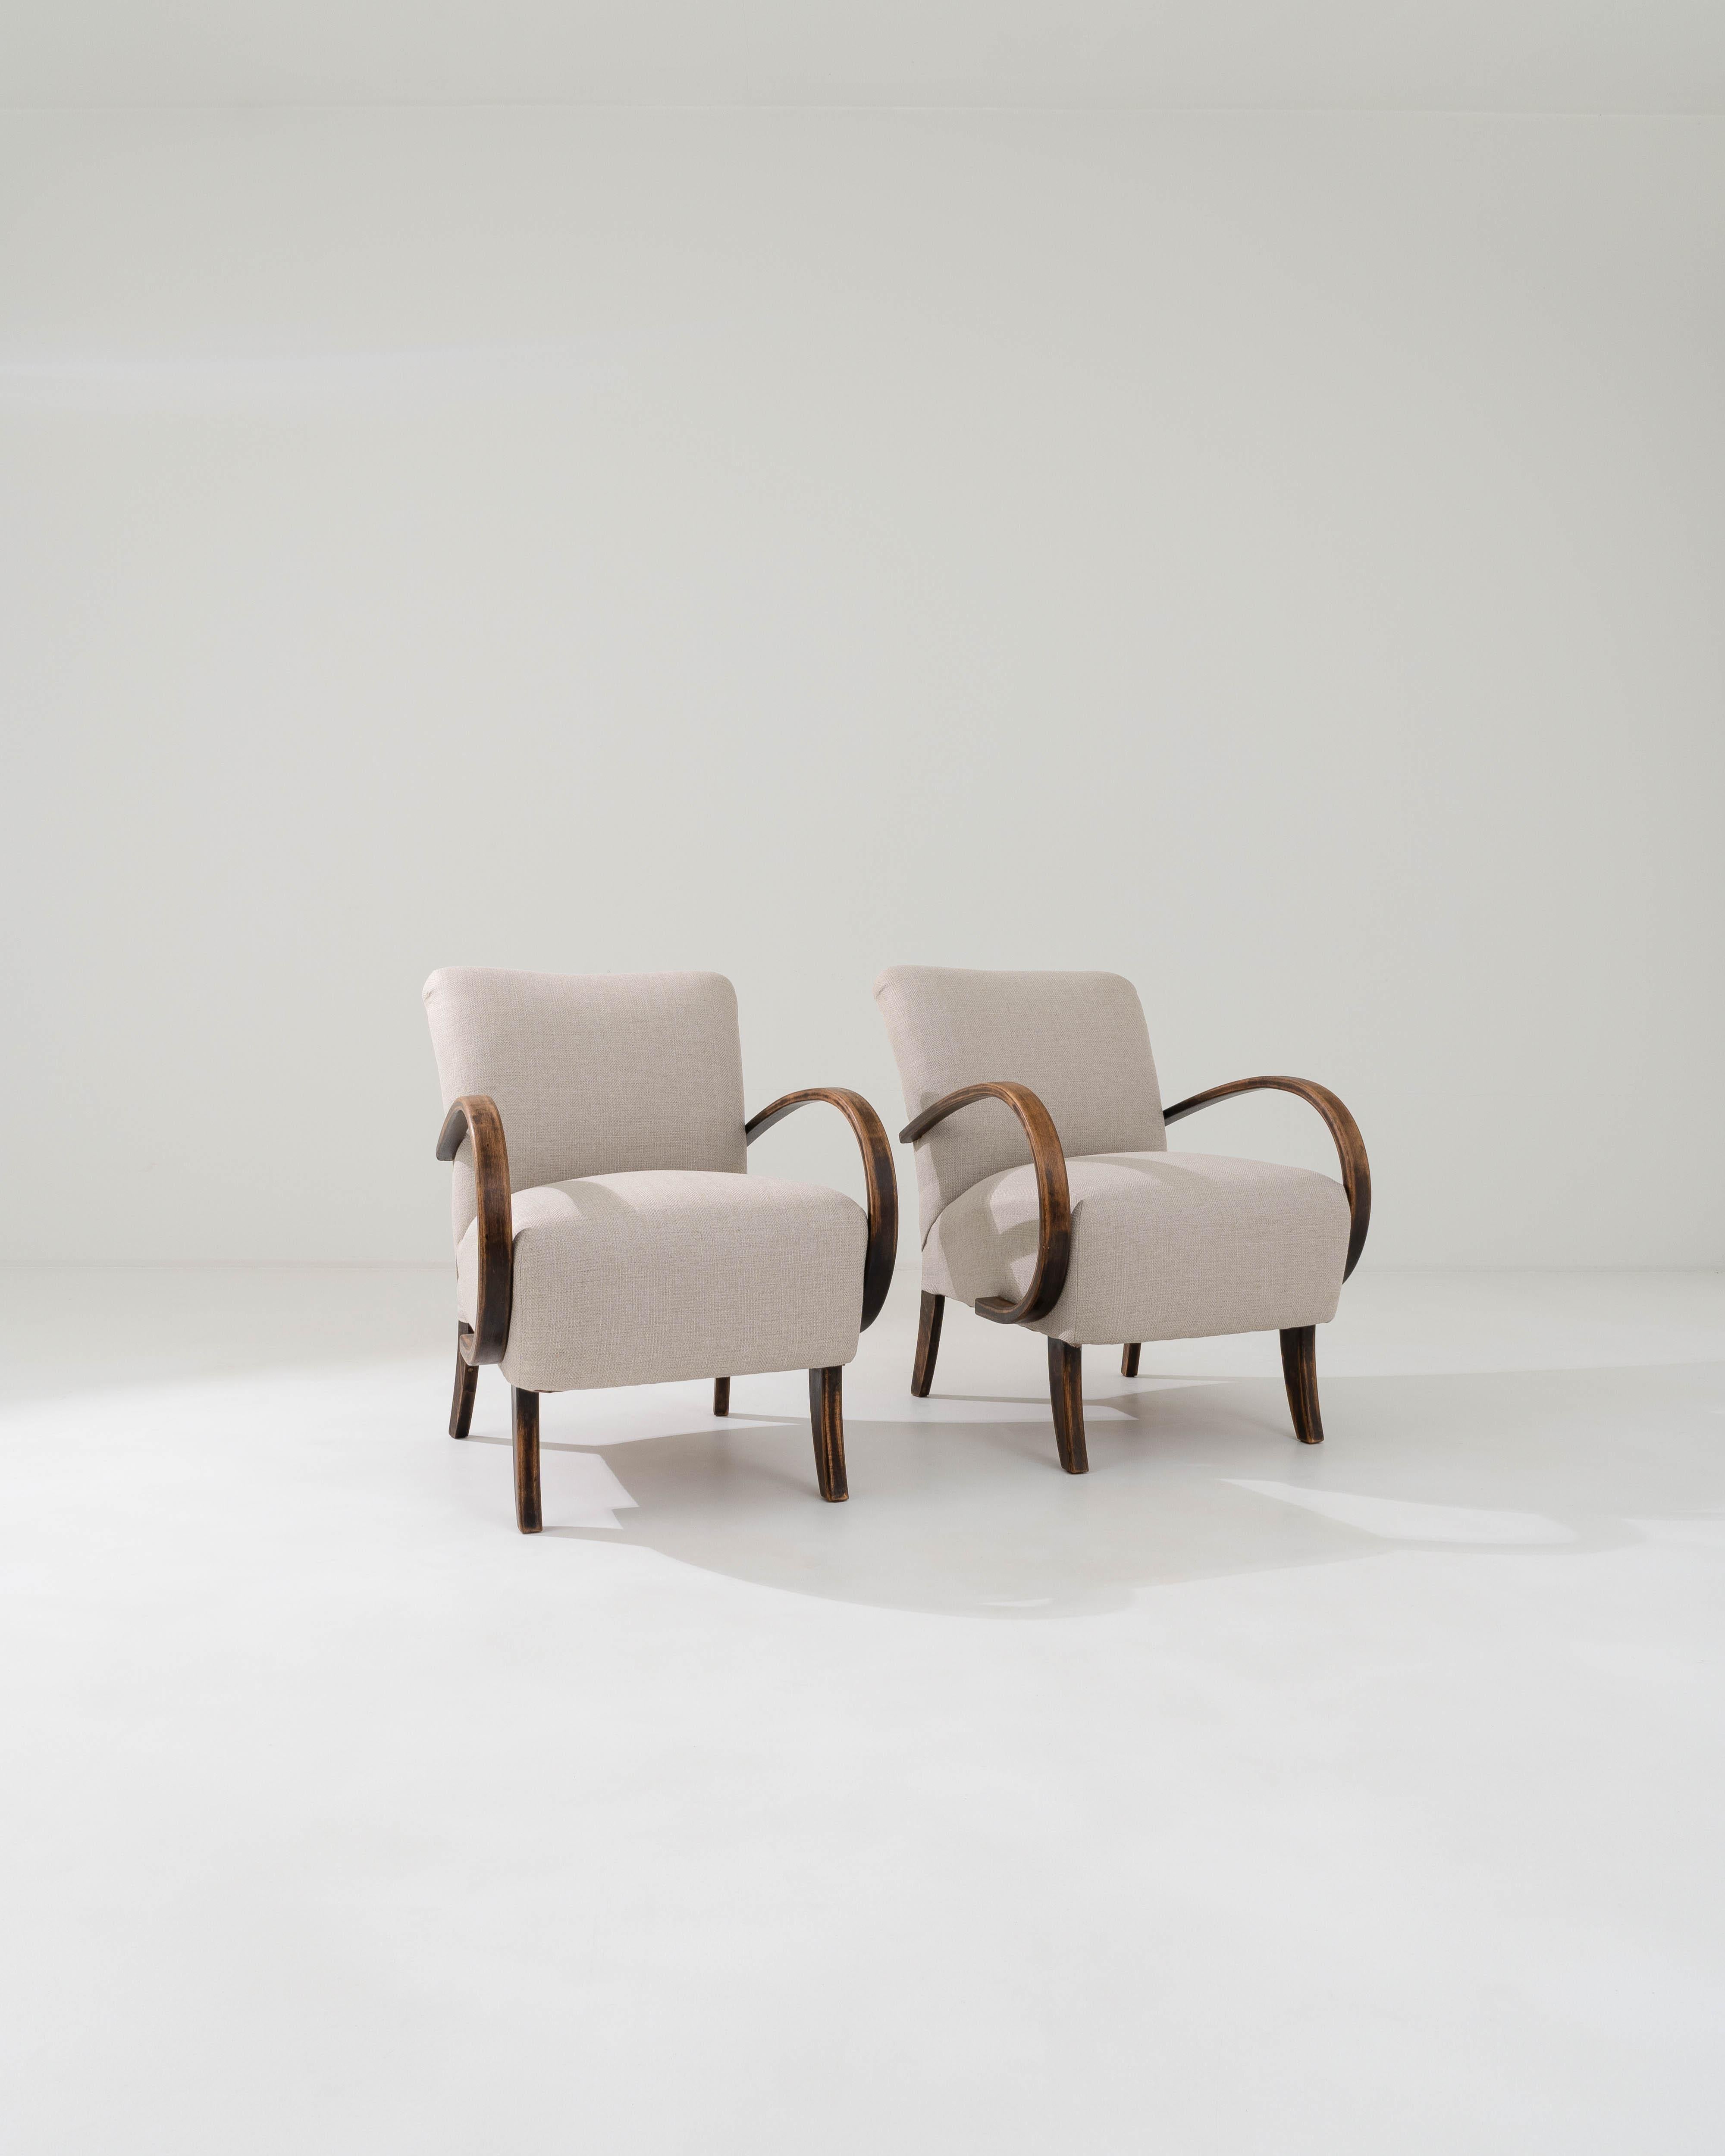 Vintage wooden frame combines with updated beige upholstery in this iconic design by J. Halabala. This early ‘type-C’ chair design was produced throughout the 20th century, and flaunts playful contrasts of color, texture and shape. The chair’s